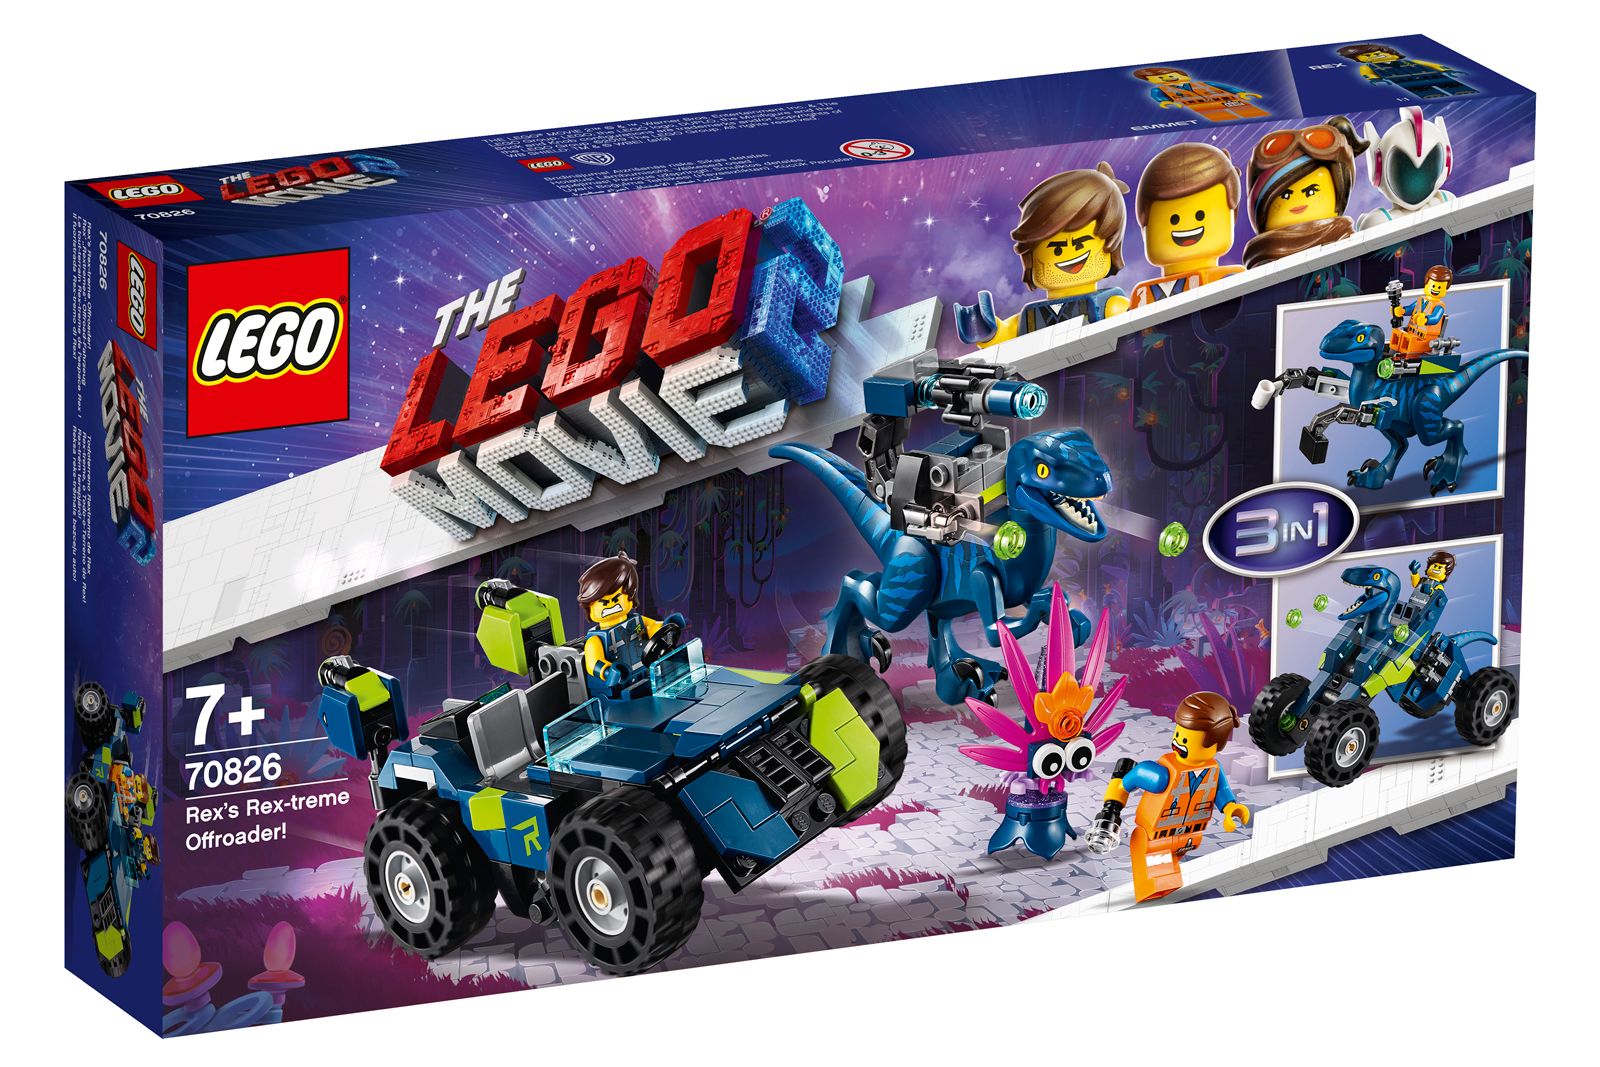 21 Lego sets from The Lego Movie 2 The Second Part - every set covered image 12